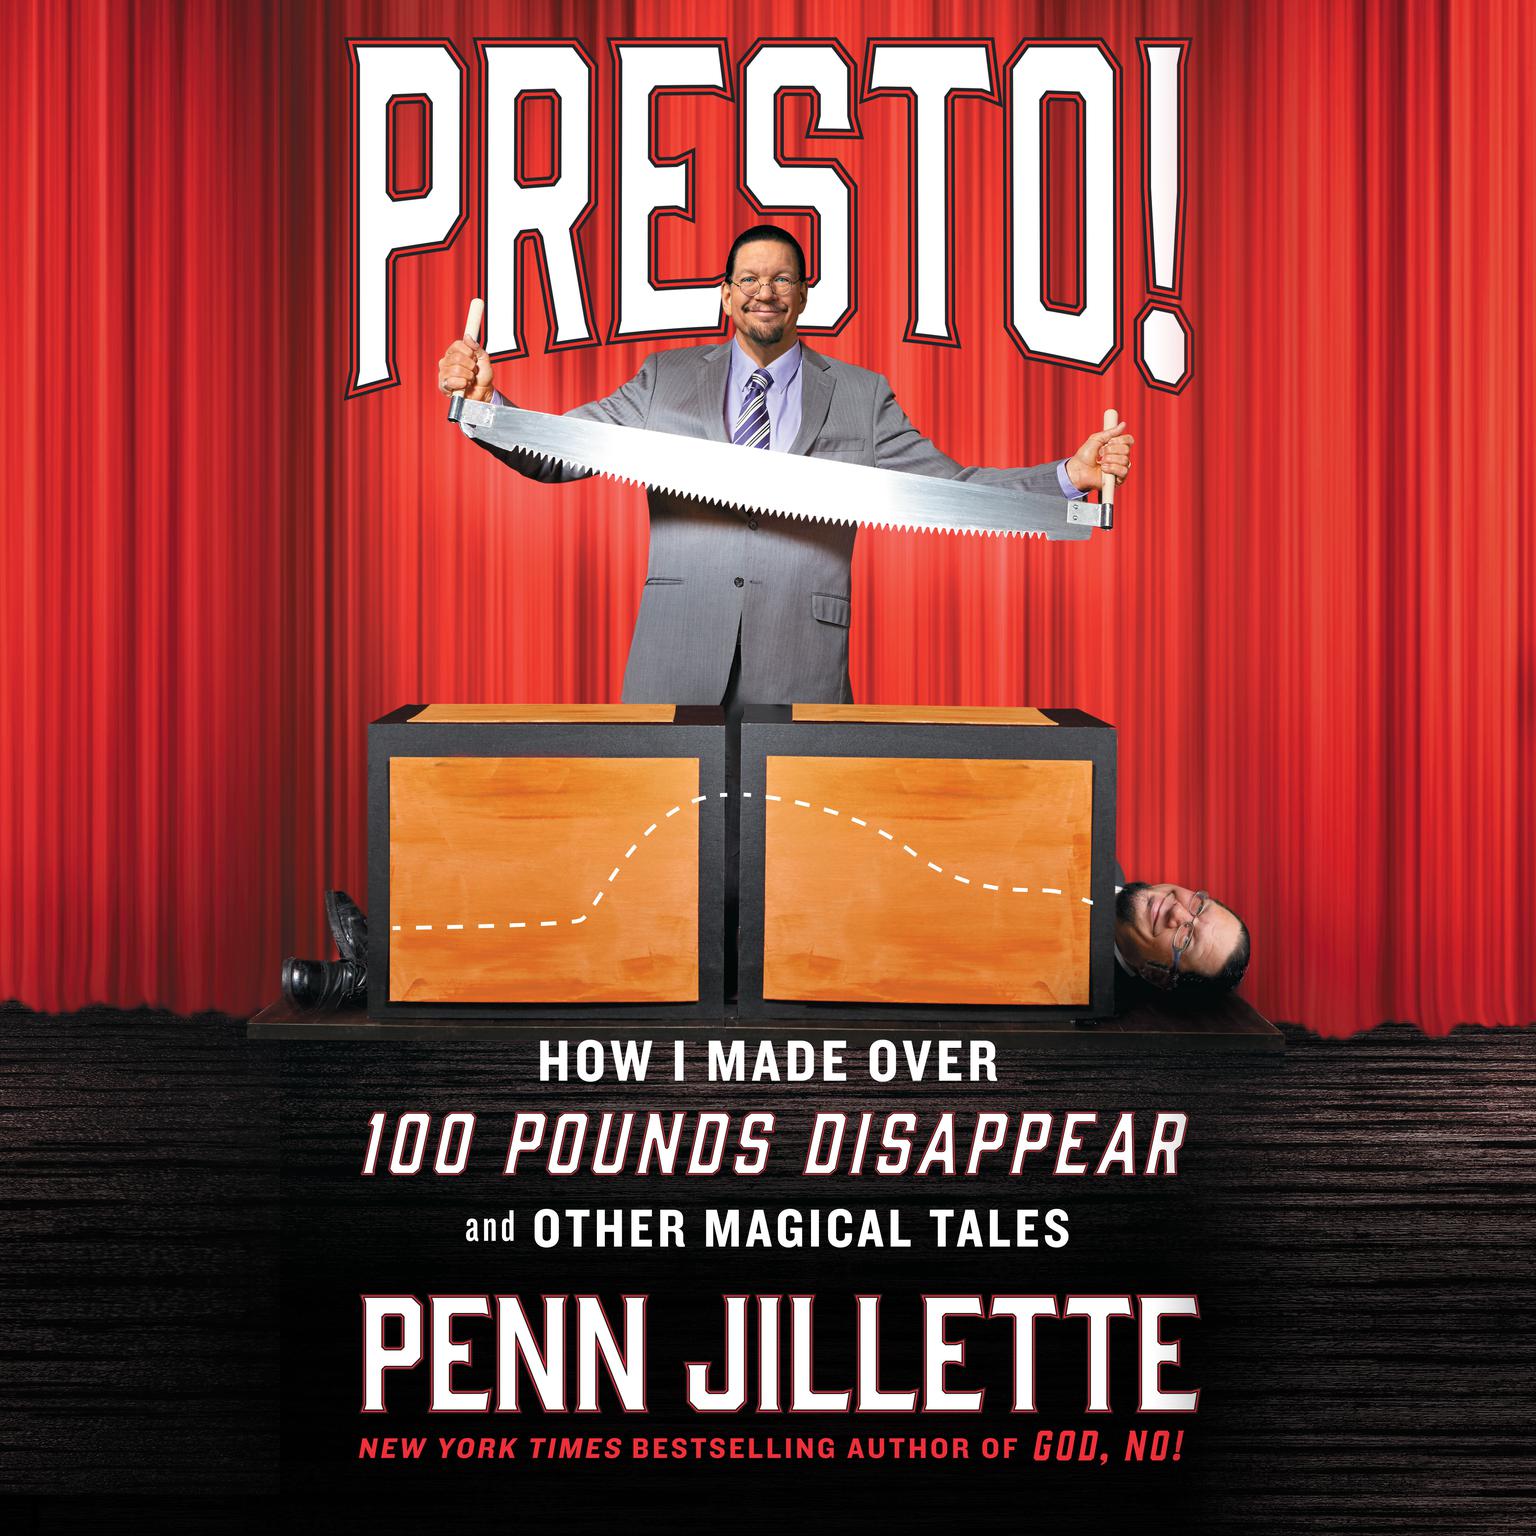 Presto!: How I Made Over 100 Pounds Disappear and Other Magical Tales Audiobook, by Penn Jillette